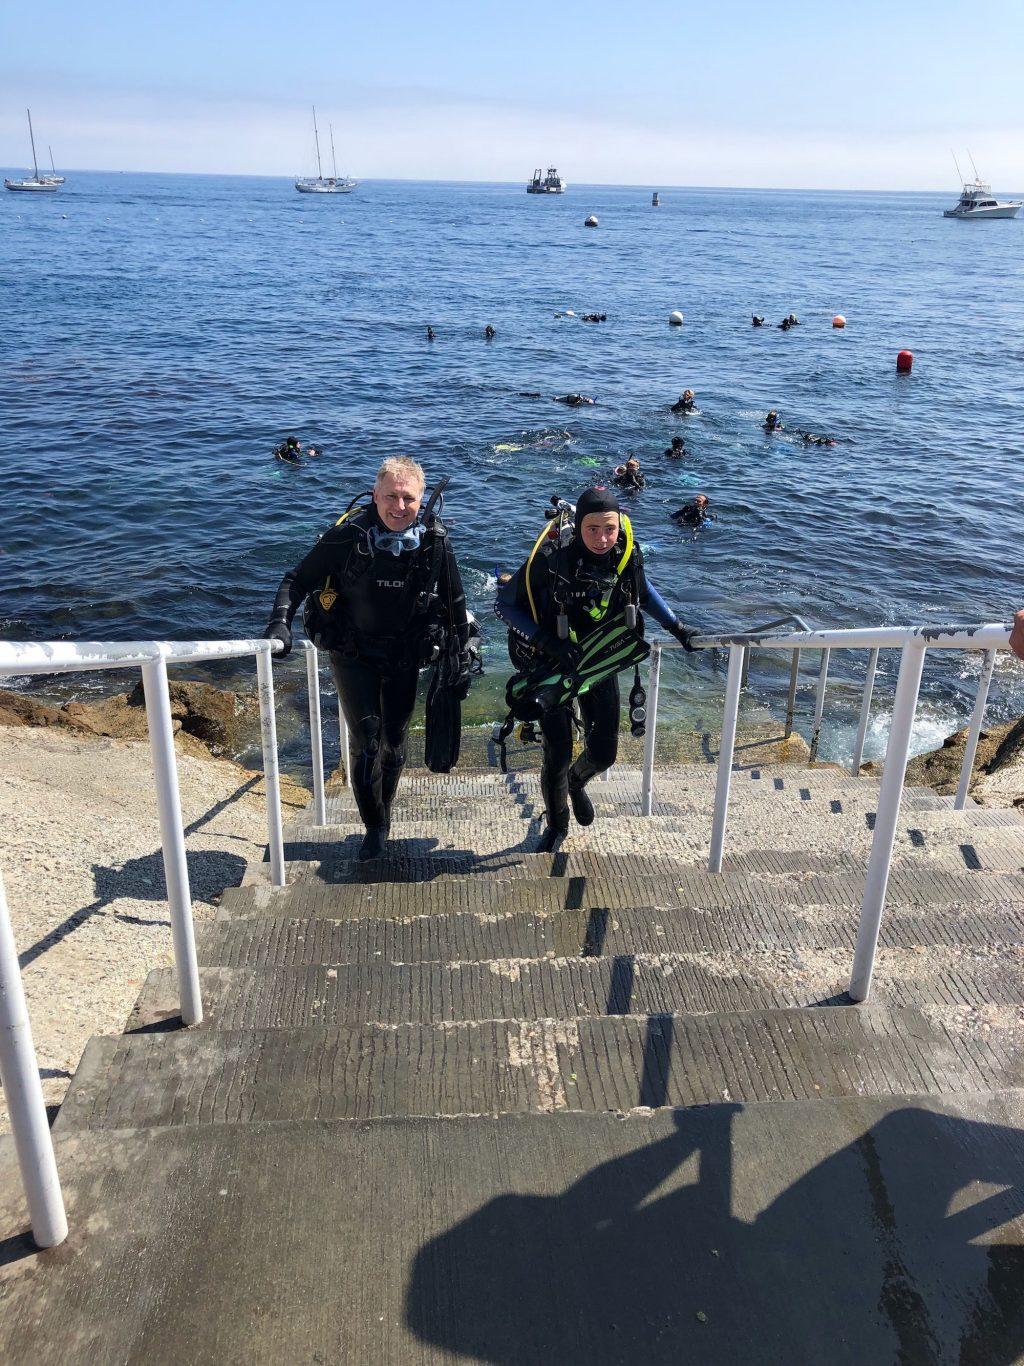 Ishak walks up stairs after scuba diving with friends at Santa Catalina Island, California. He earned his advanced scuba driver certification in 2016.